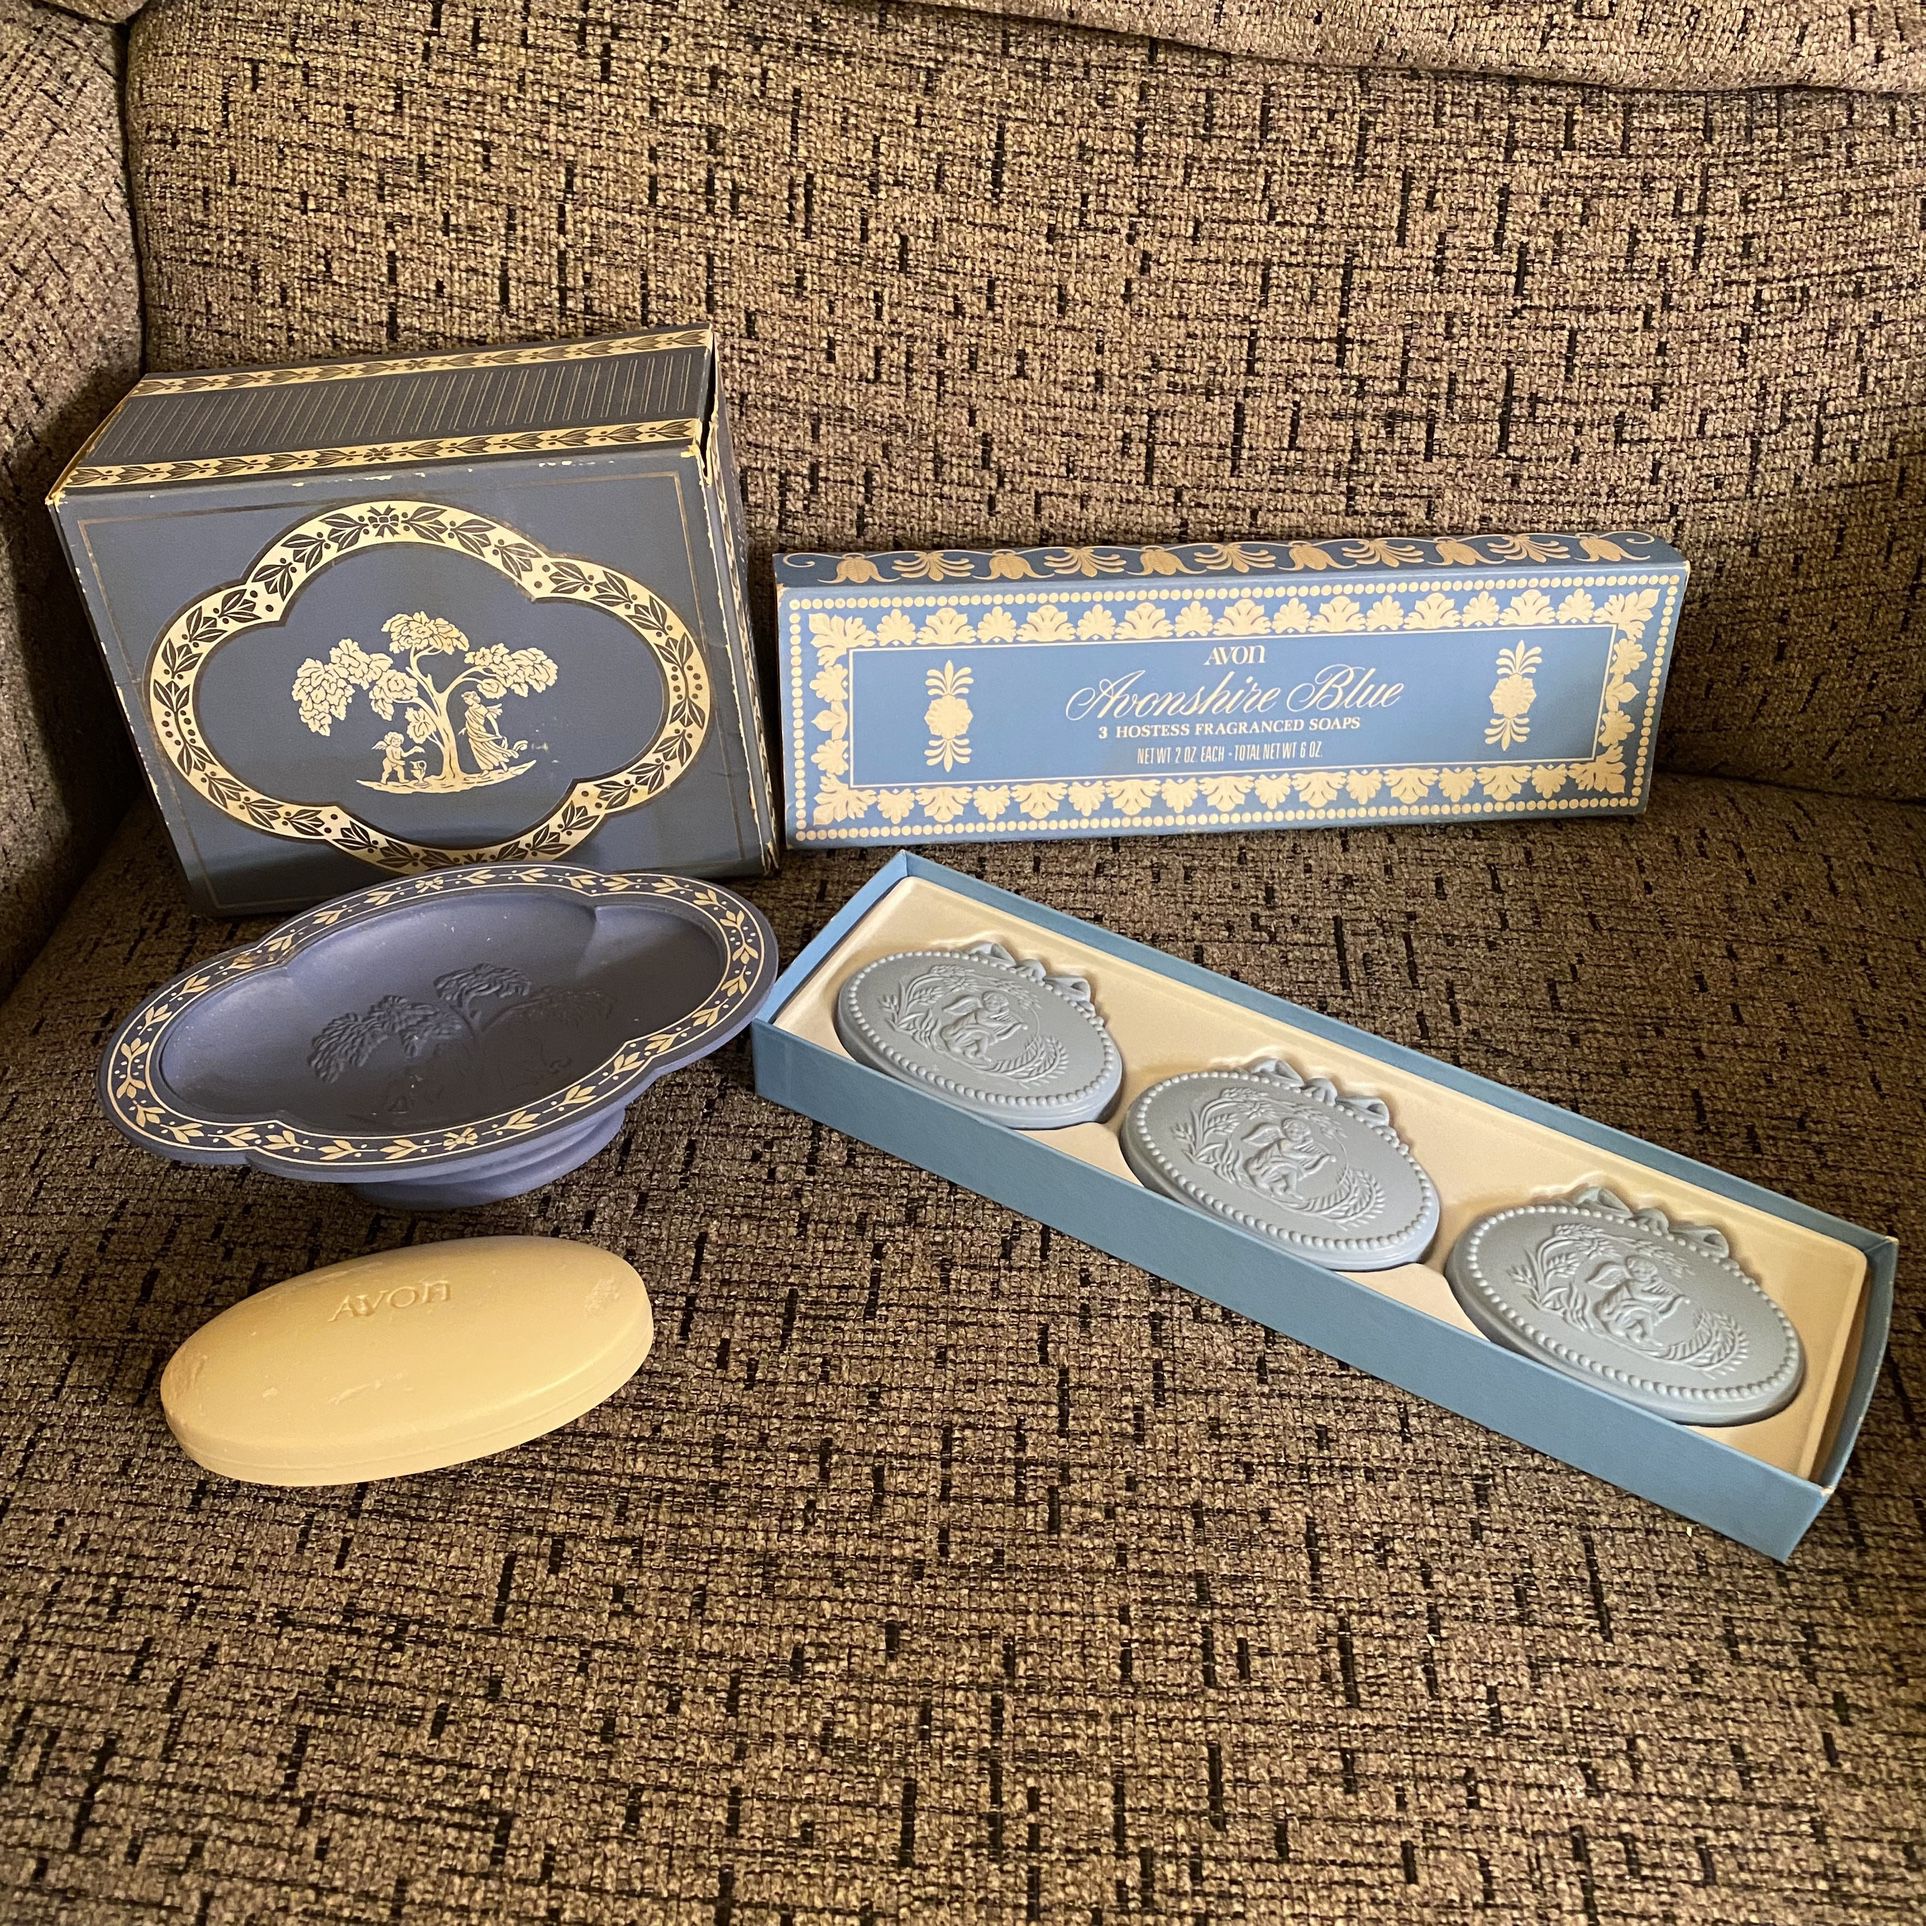 VTG Avon Avonshire Blue Soap Dish And Soap & 3 Hostess Fragranced Soaps As Is